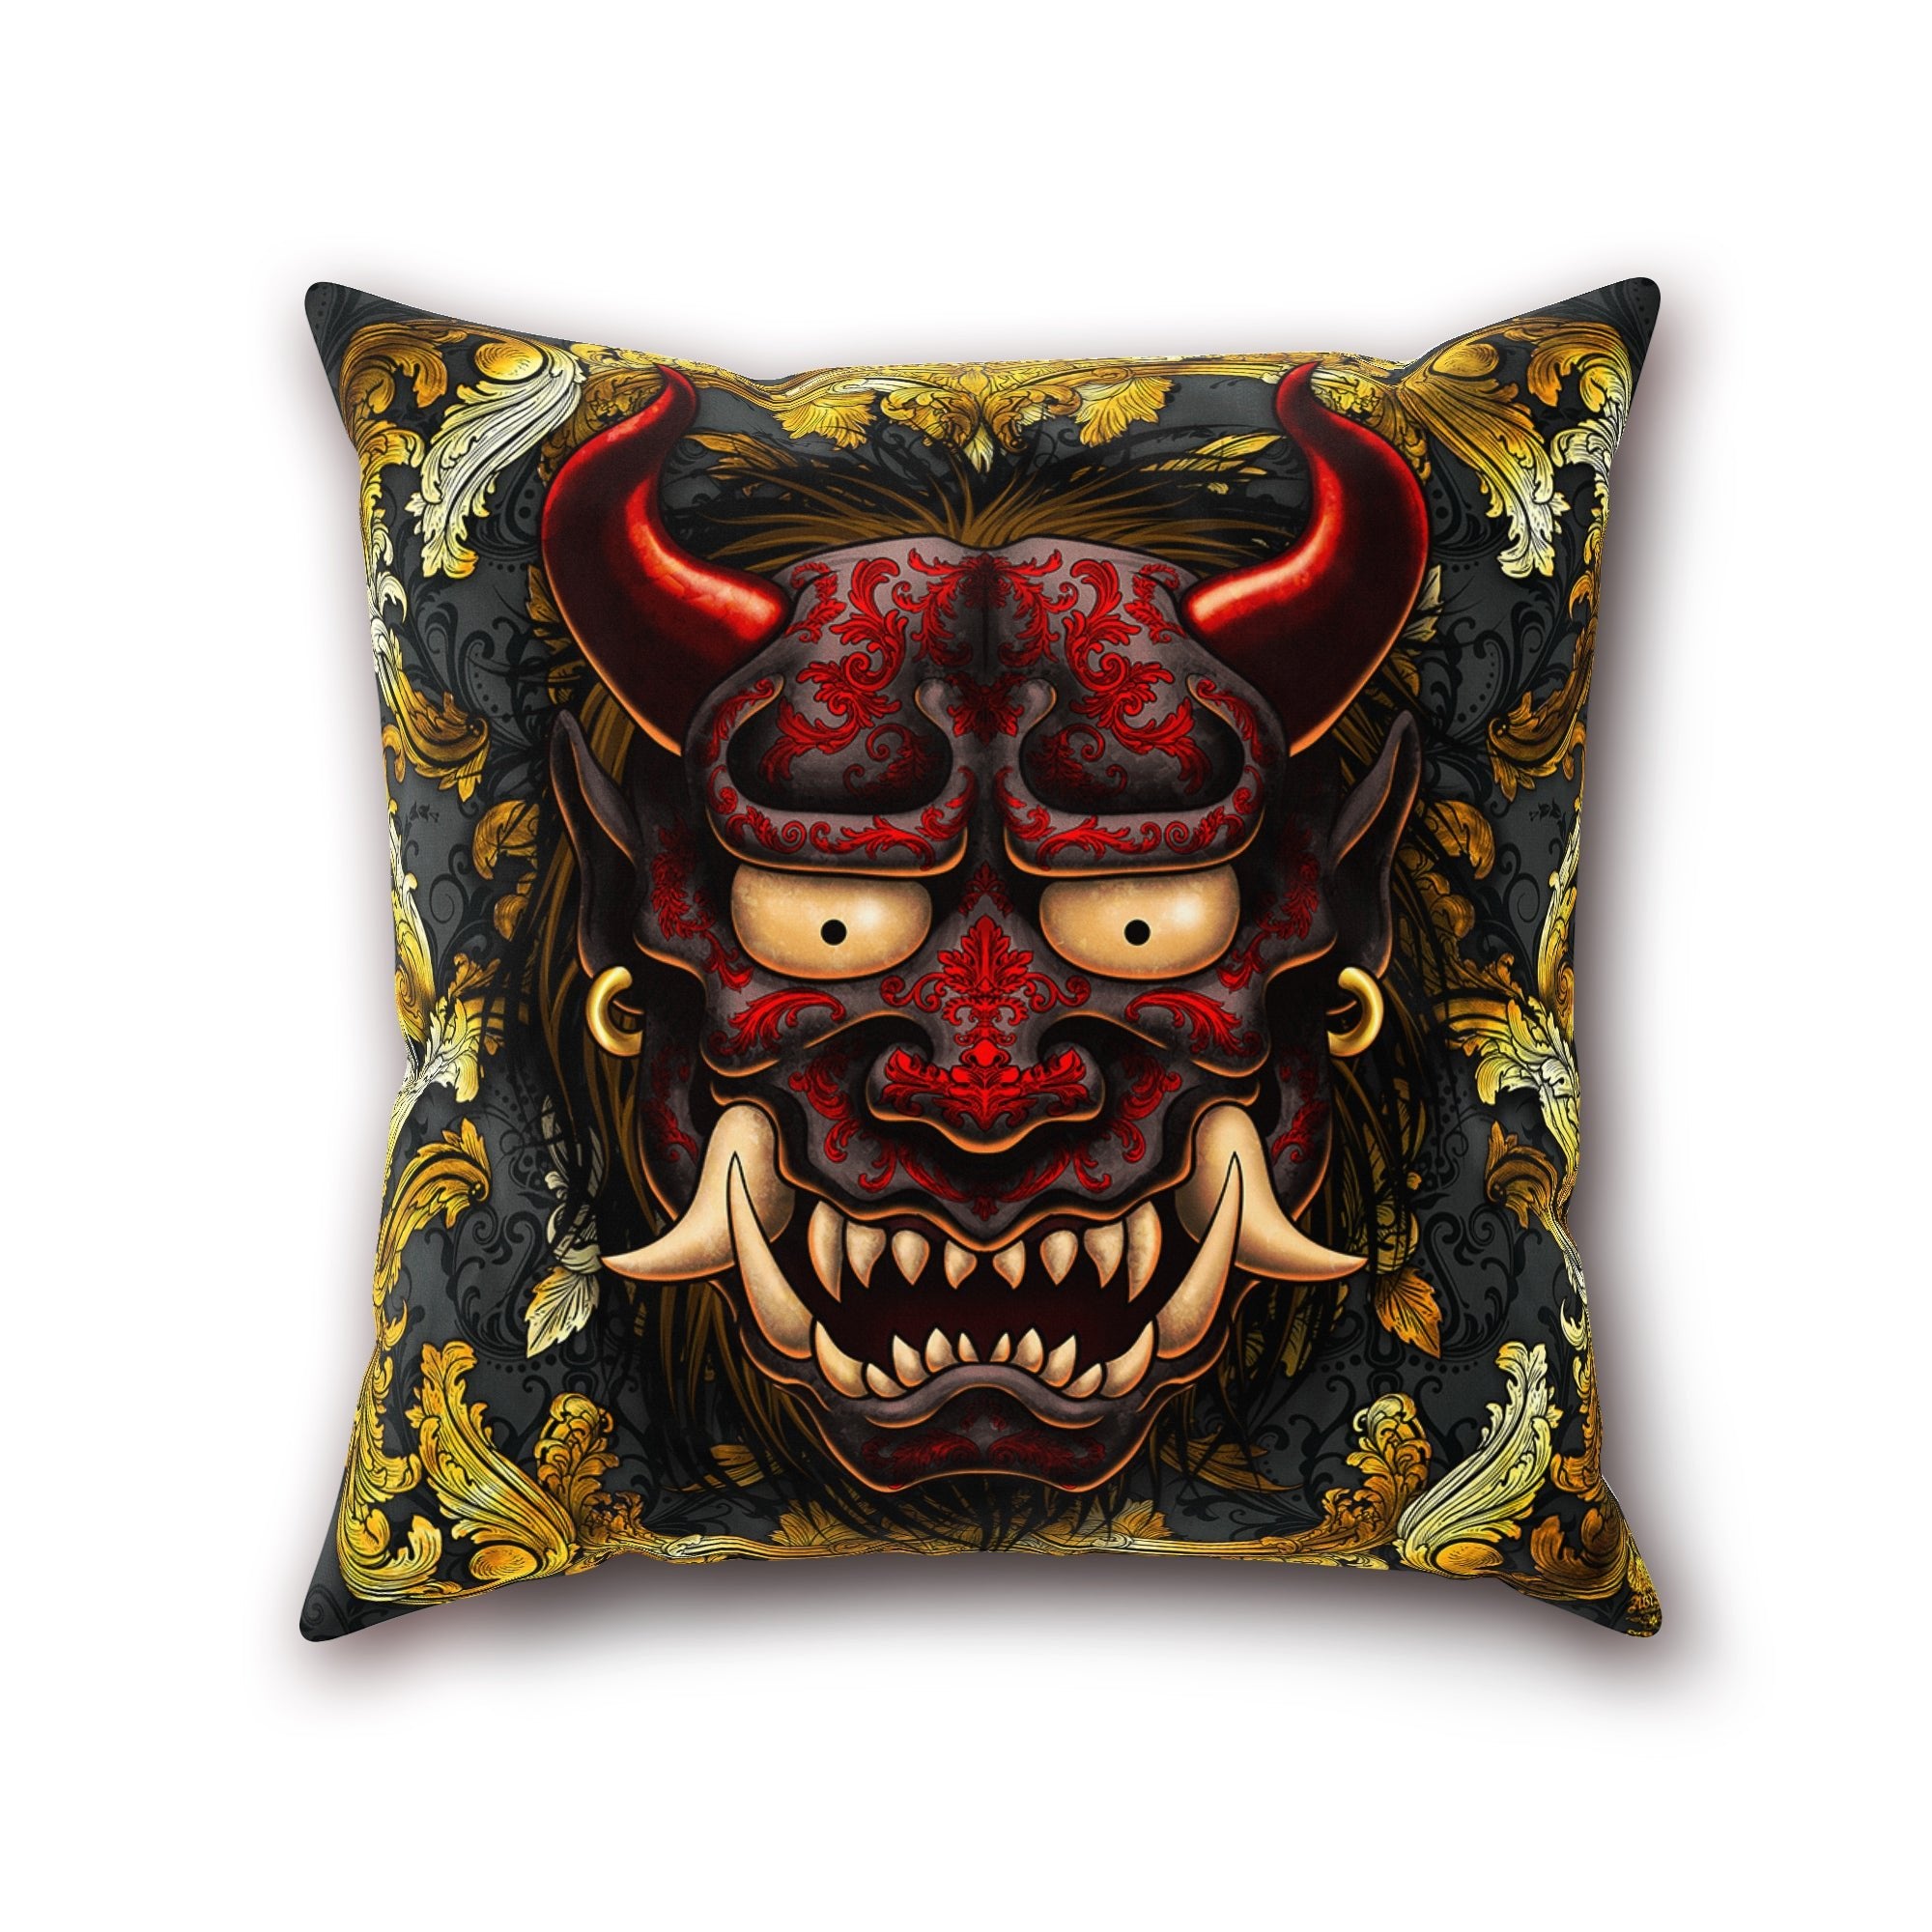 Gold Oni Throw Pillow, Decorative Accent Pillow, Square Cushion Cover, Demon, Alternative Home - Red or Black, 2 Colors - Abysm Internal